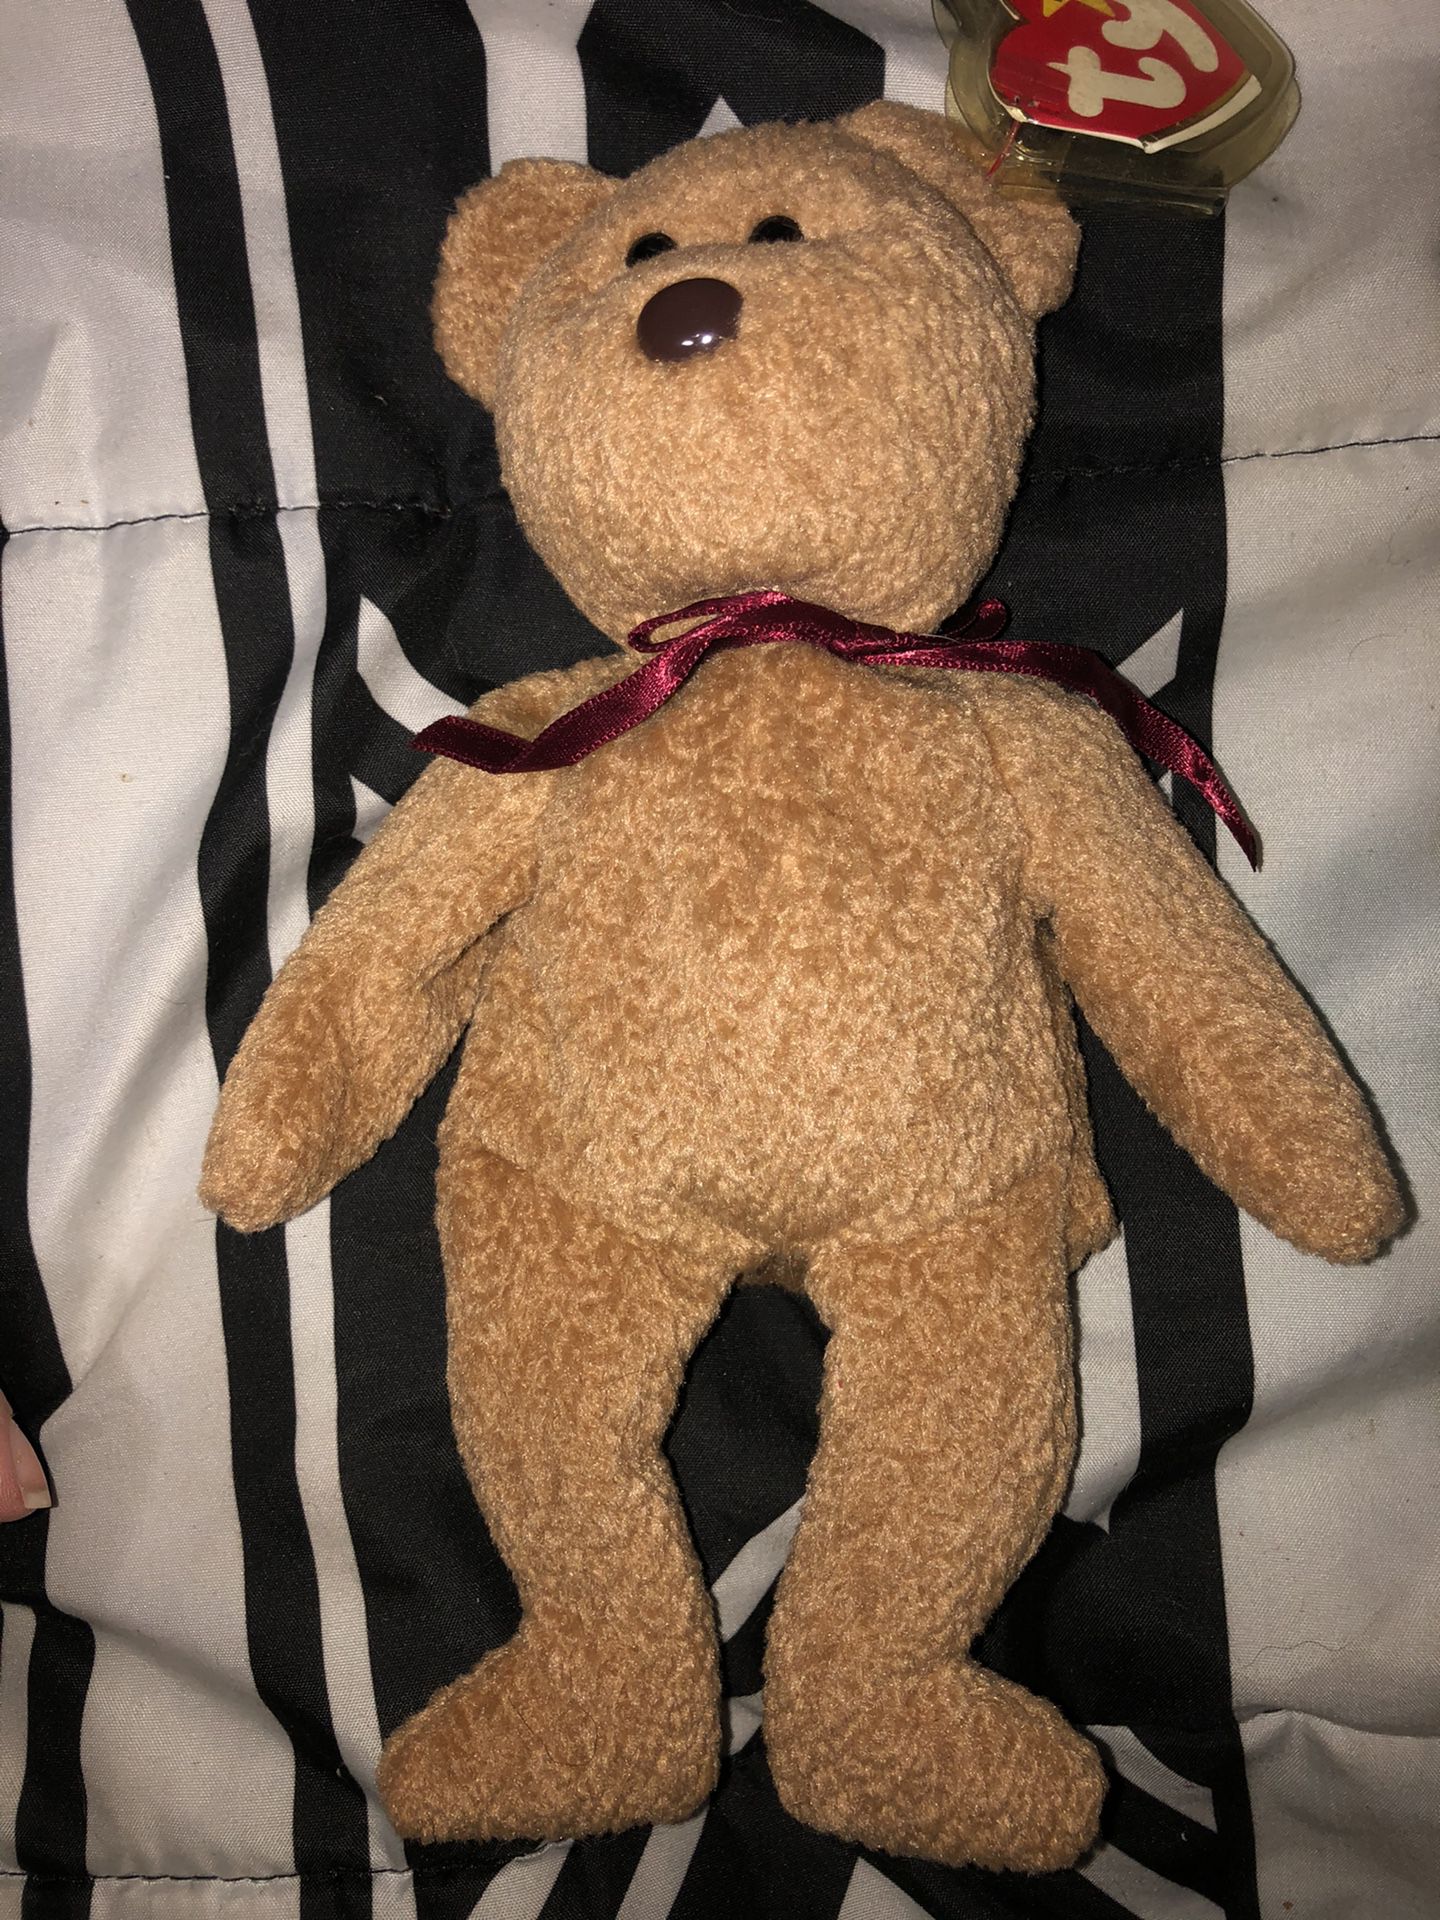 Curly Beanie Baby - MAKE ME AN OFFER